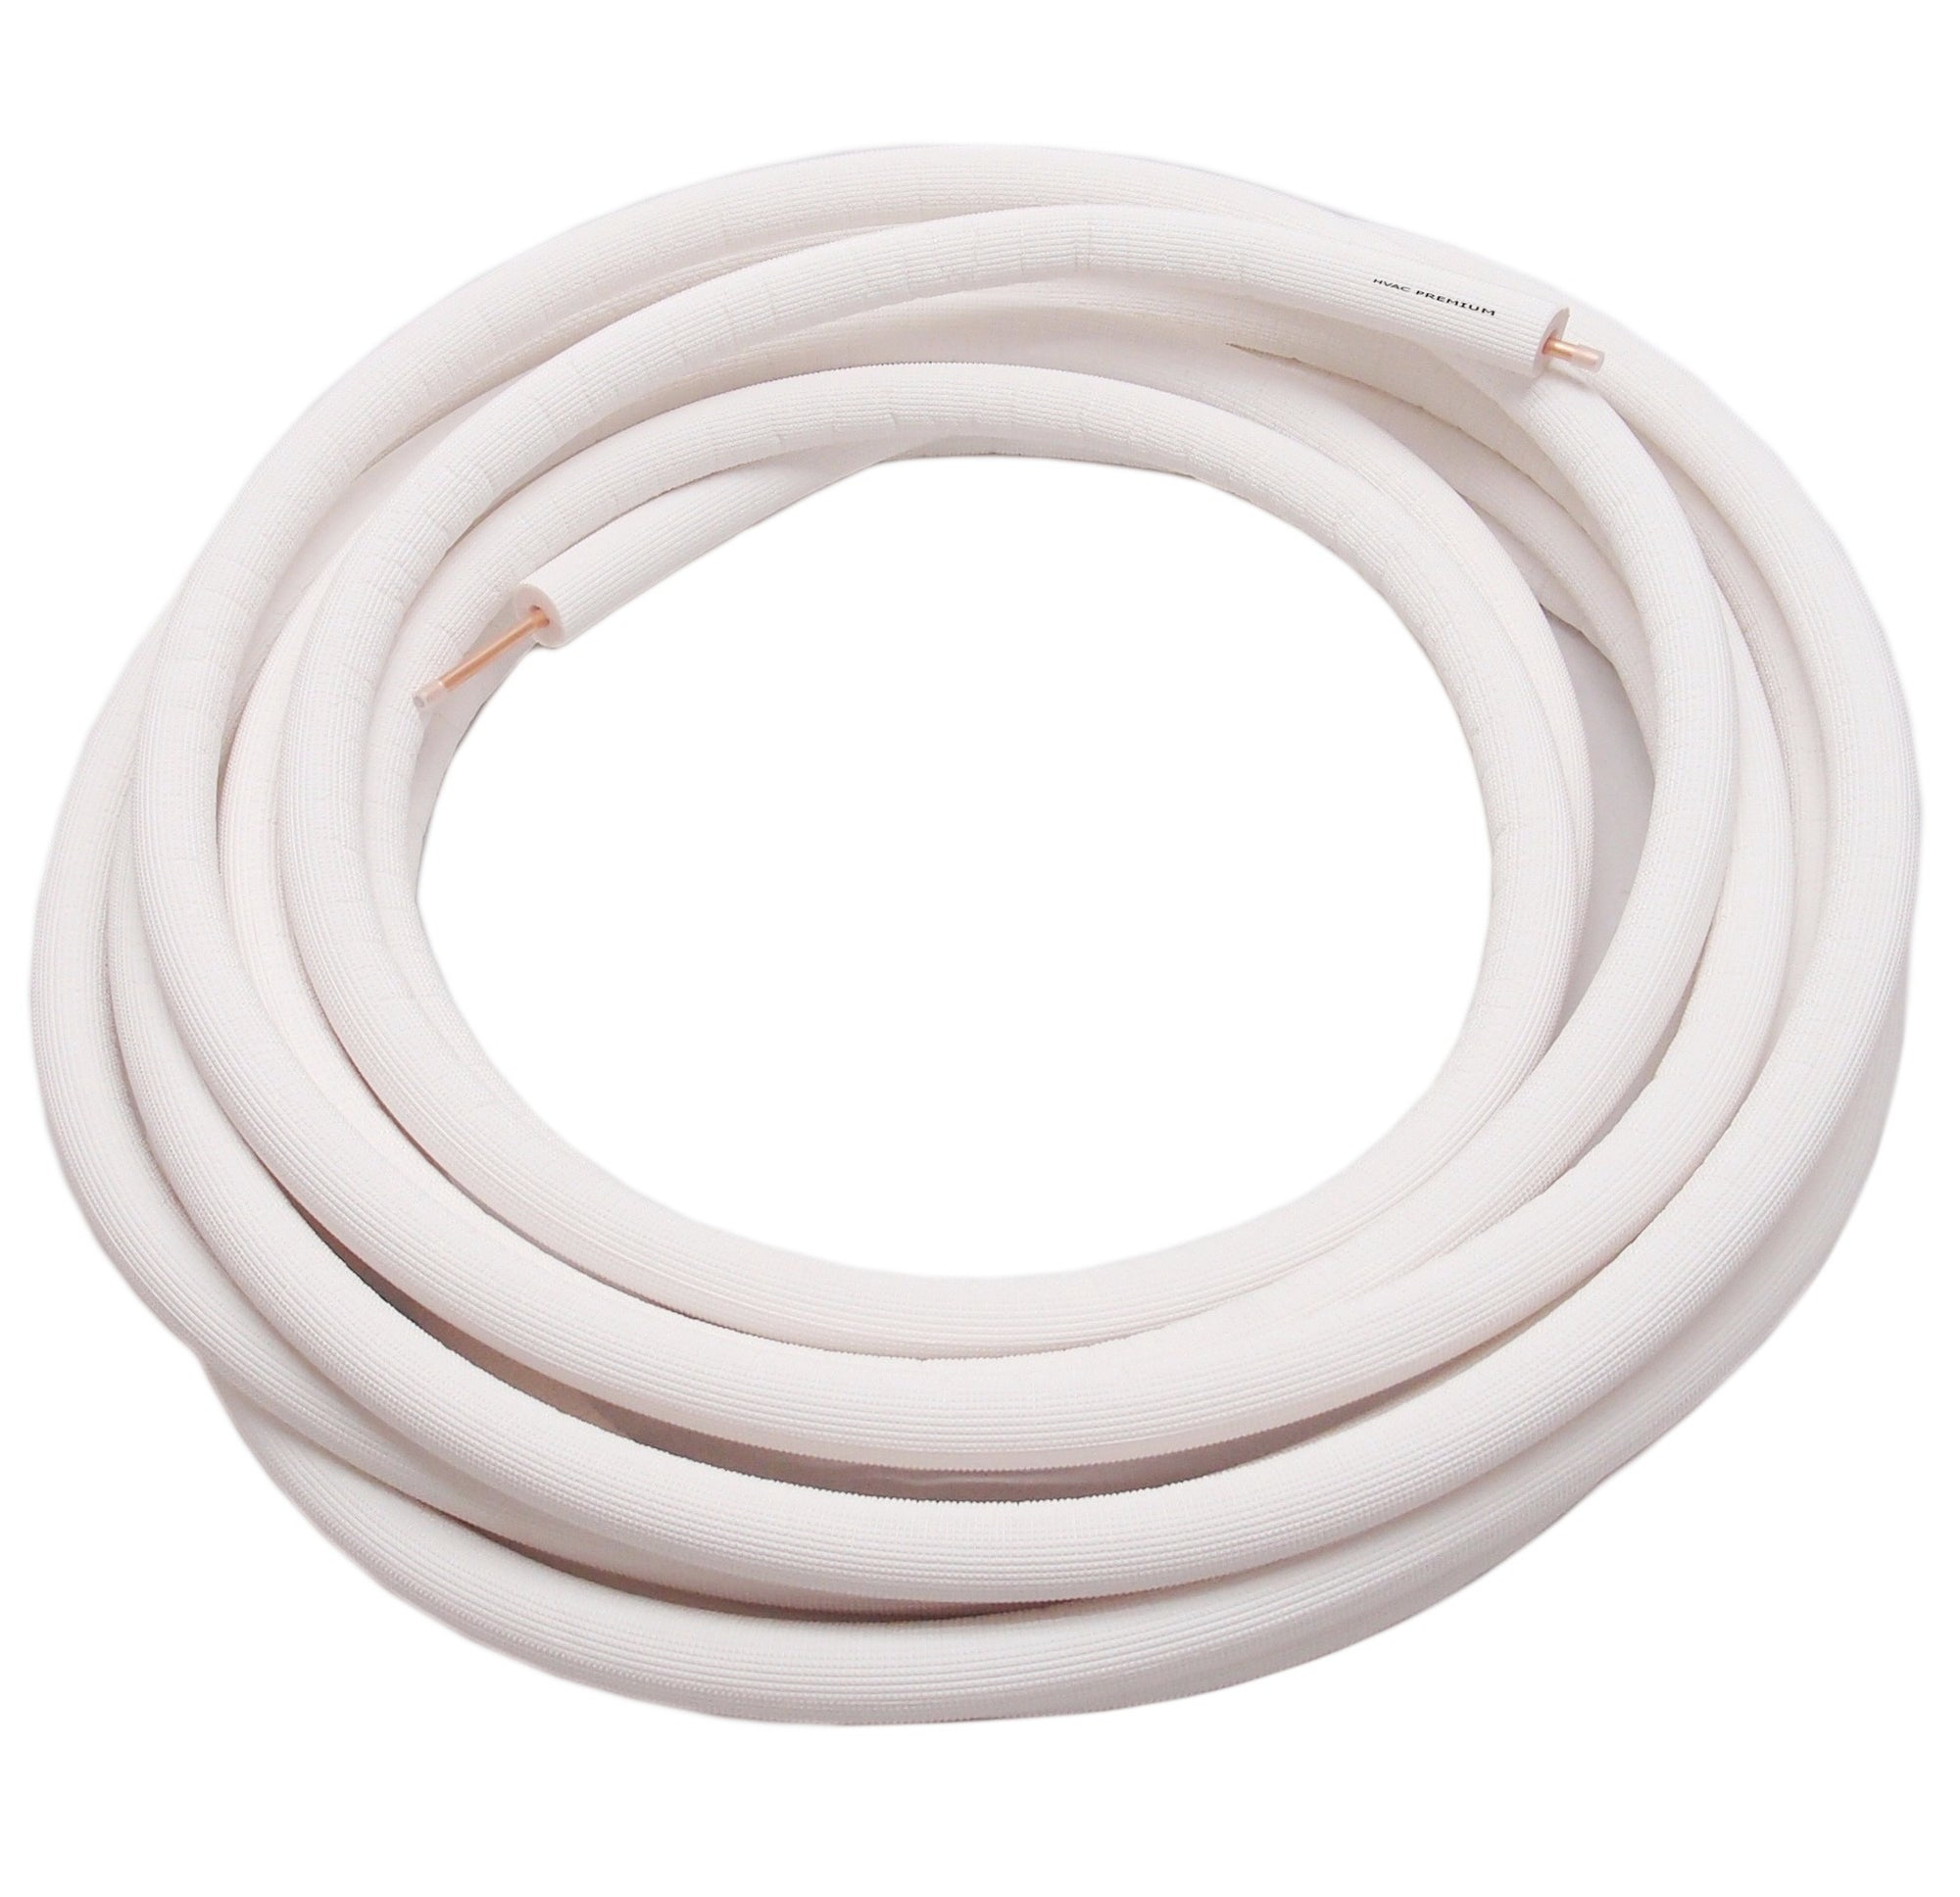 1-1/8" Insulated Copper Coil Line - Seamless Pipe Tube for HVAC, Refrigerant - 1/2" White Insulation - 25' Long